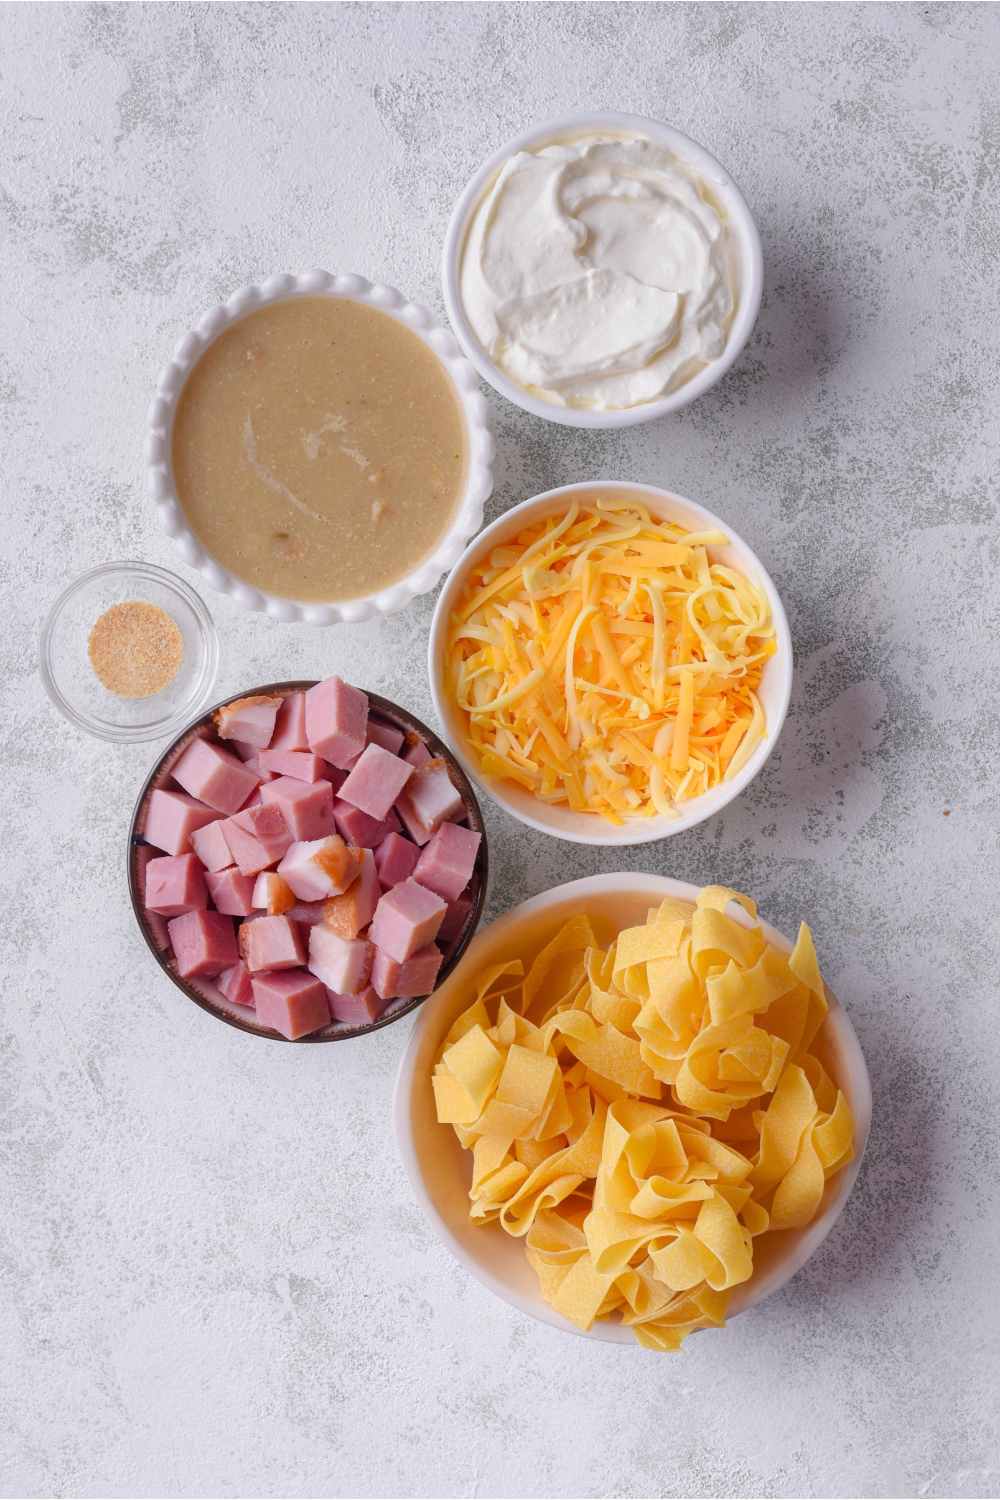 An assortment of ingredients including bowls of dried egg noodle nests, diced ham, shredded cheese, cream of mushroom soup, and sour cream.